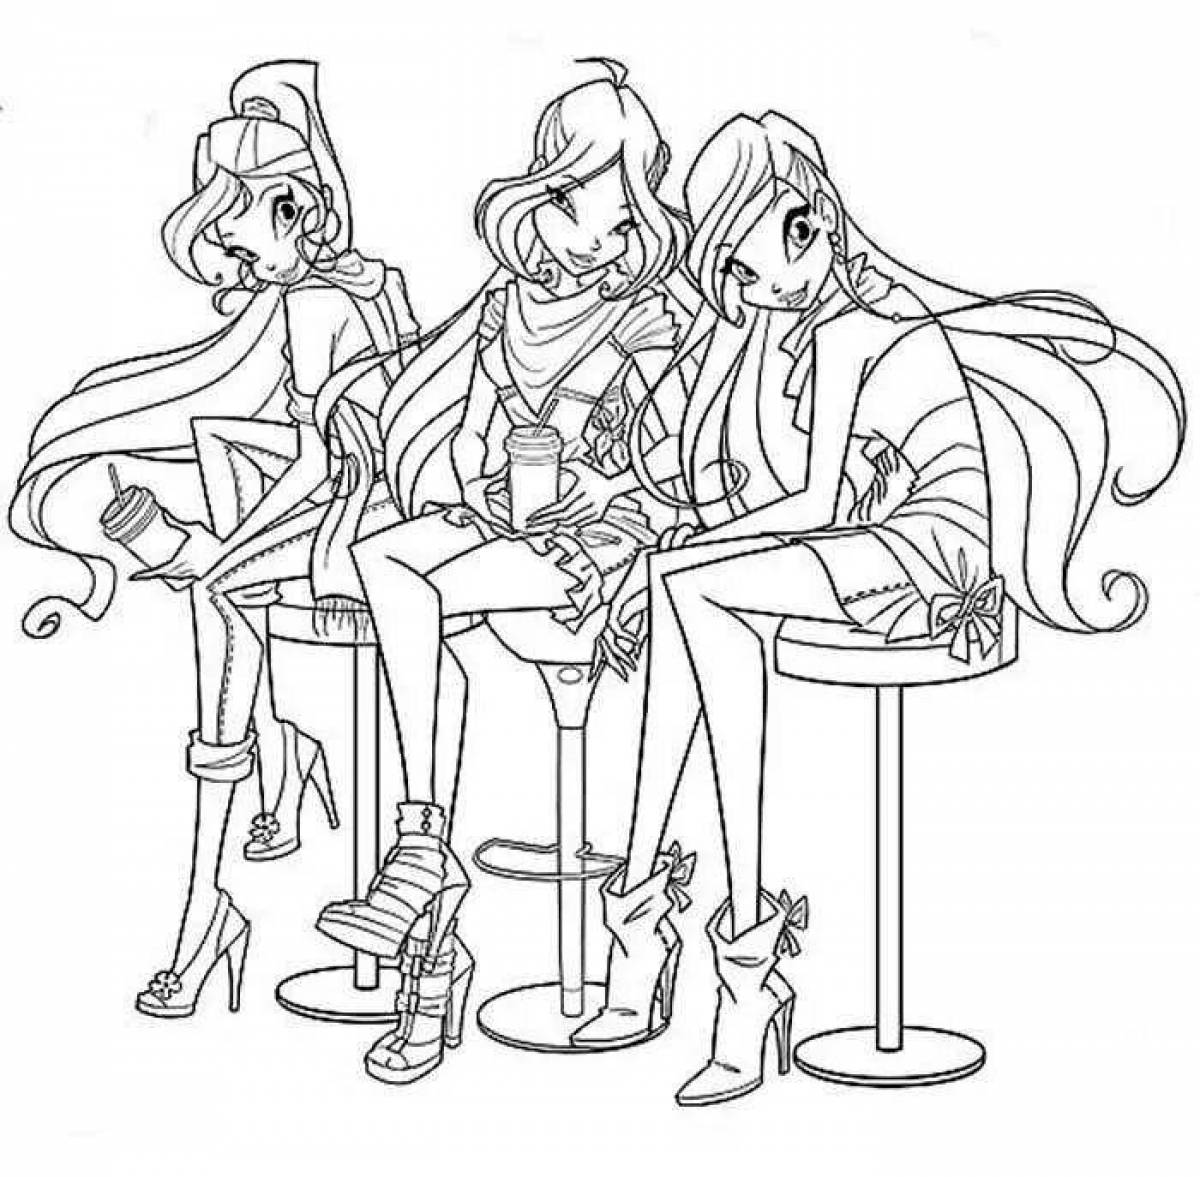 Zany coloring page flora team